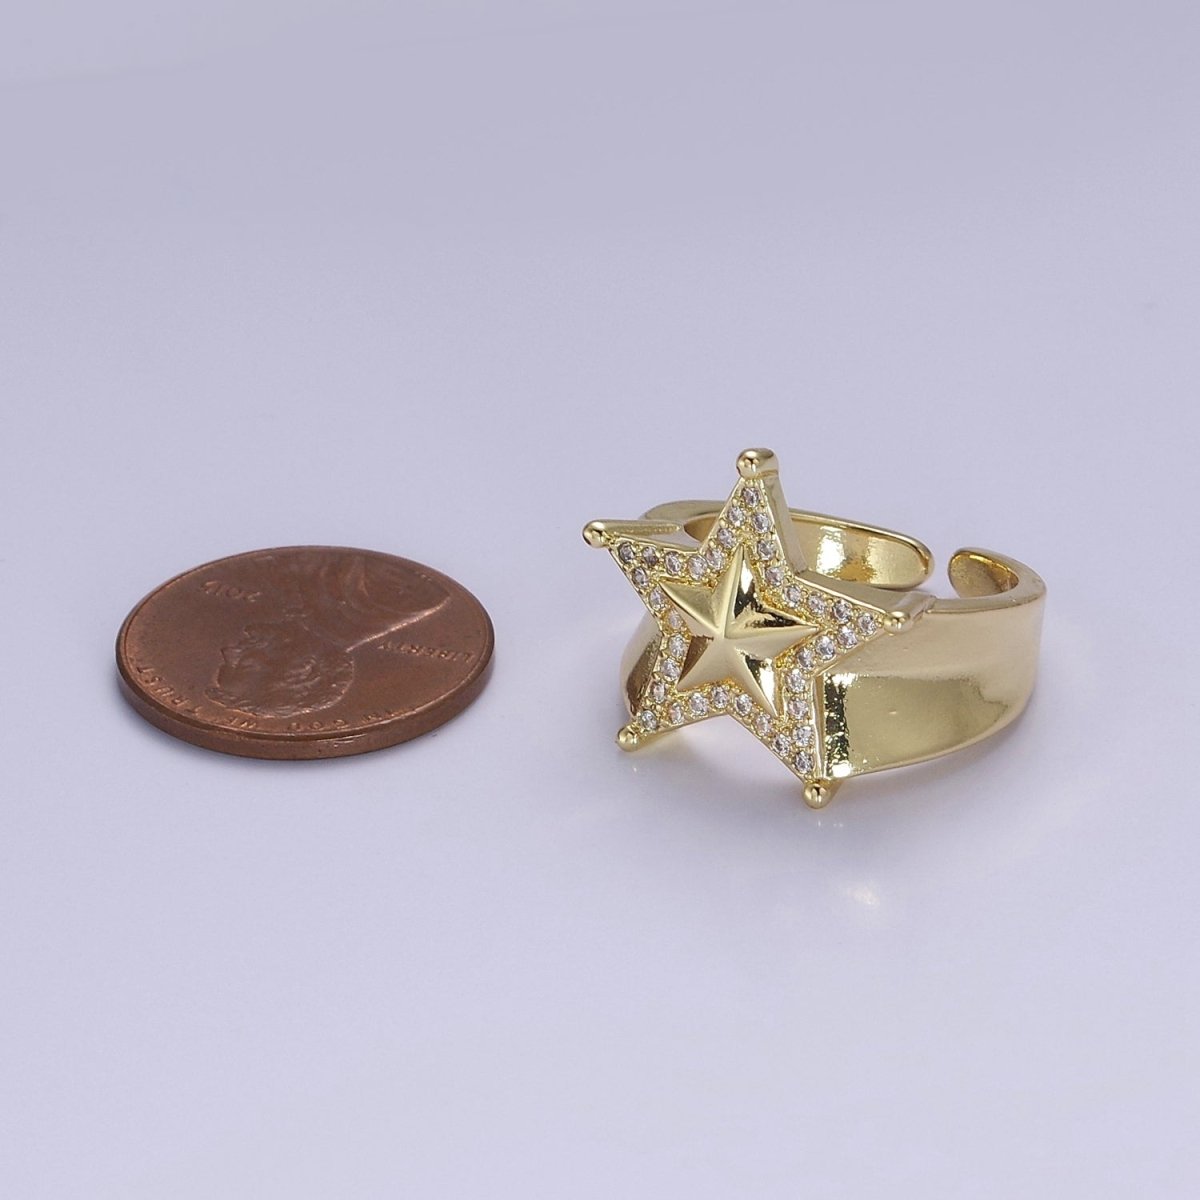 Chunky Gold Star Ring, CZ Star Ring, Bold Star Ring, Celestial jewelry, Stacking Statement Jewelry O-2043 - DLUXCA